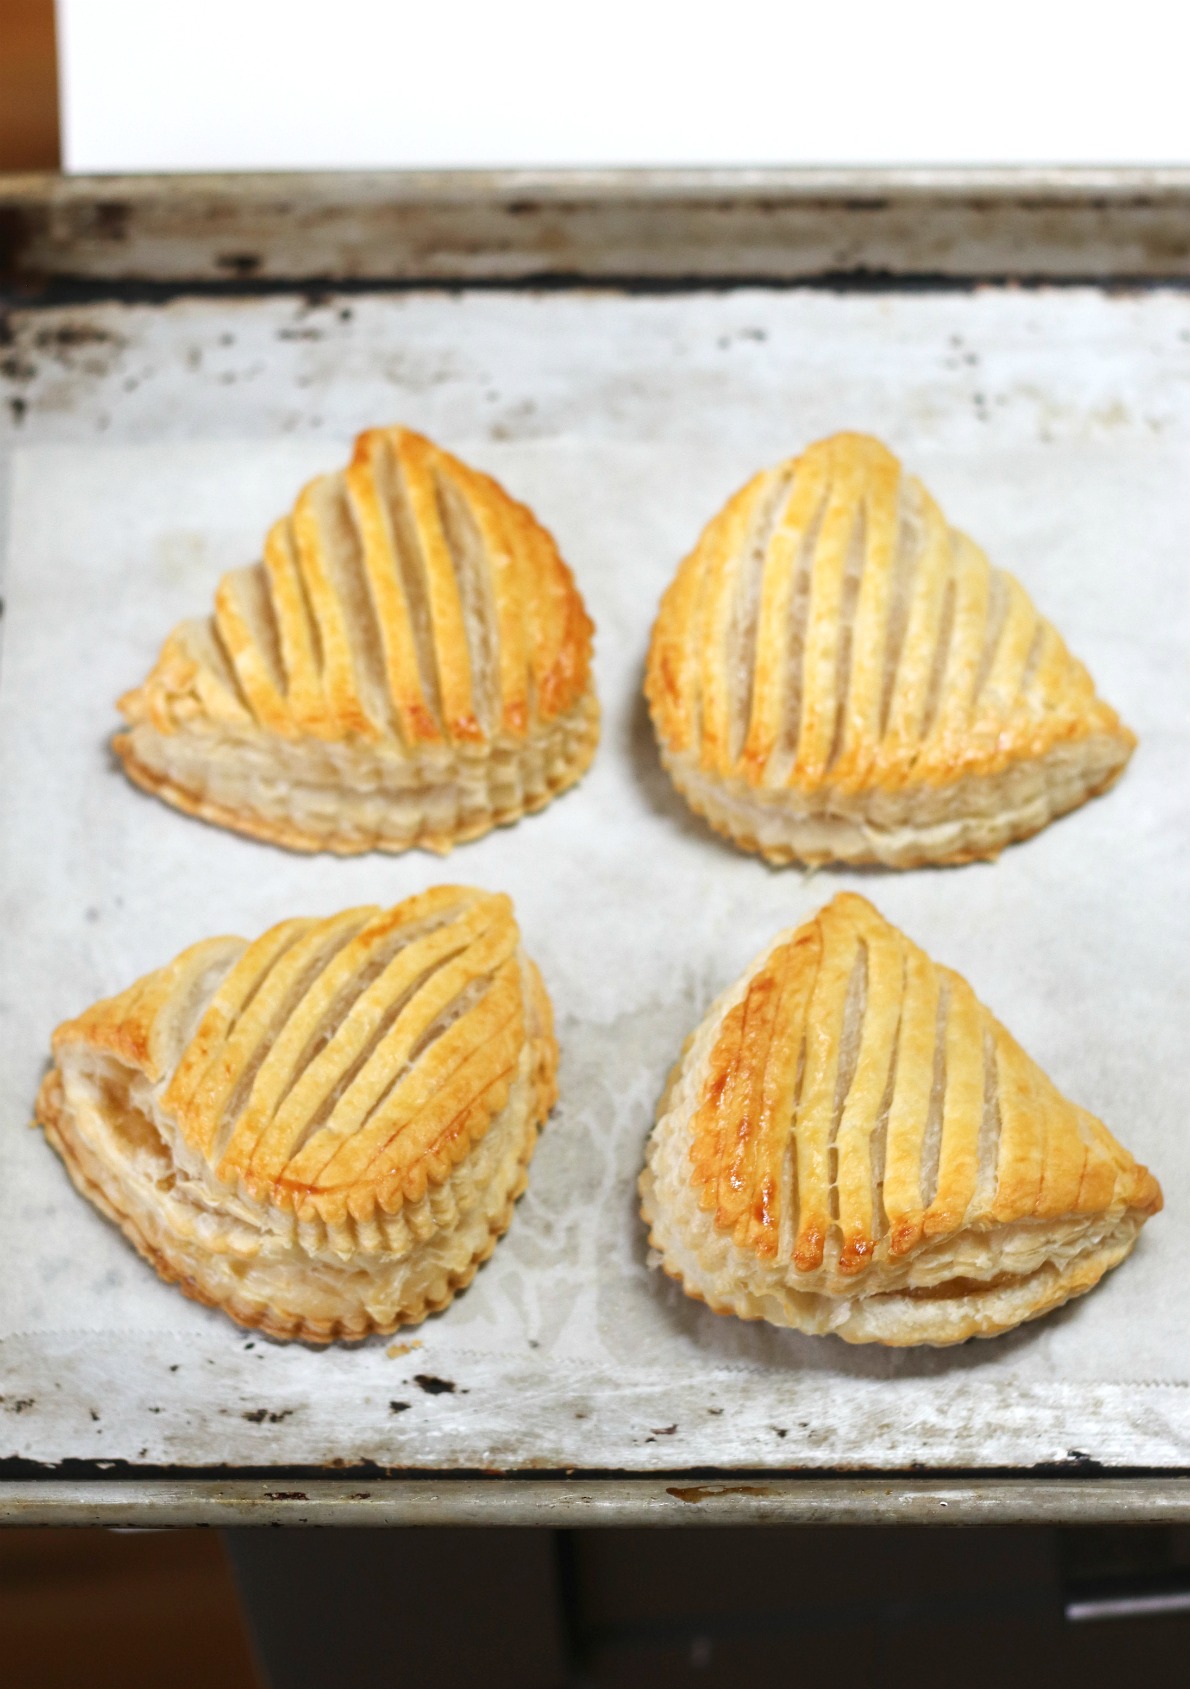 Goodfood apple turnovers just out of the oven